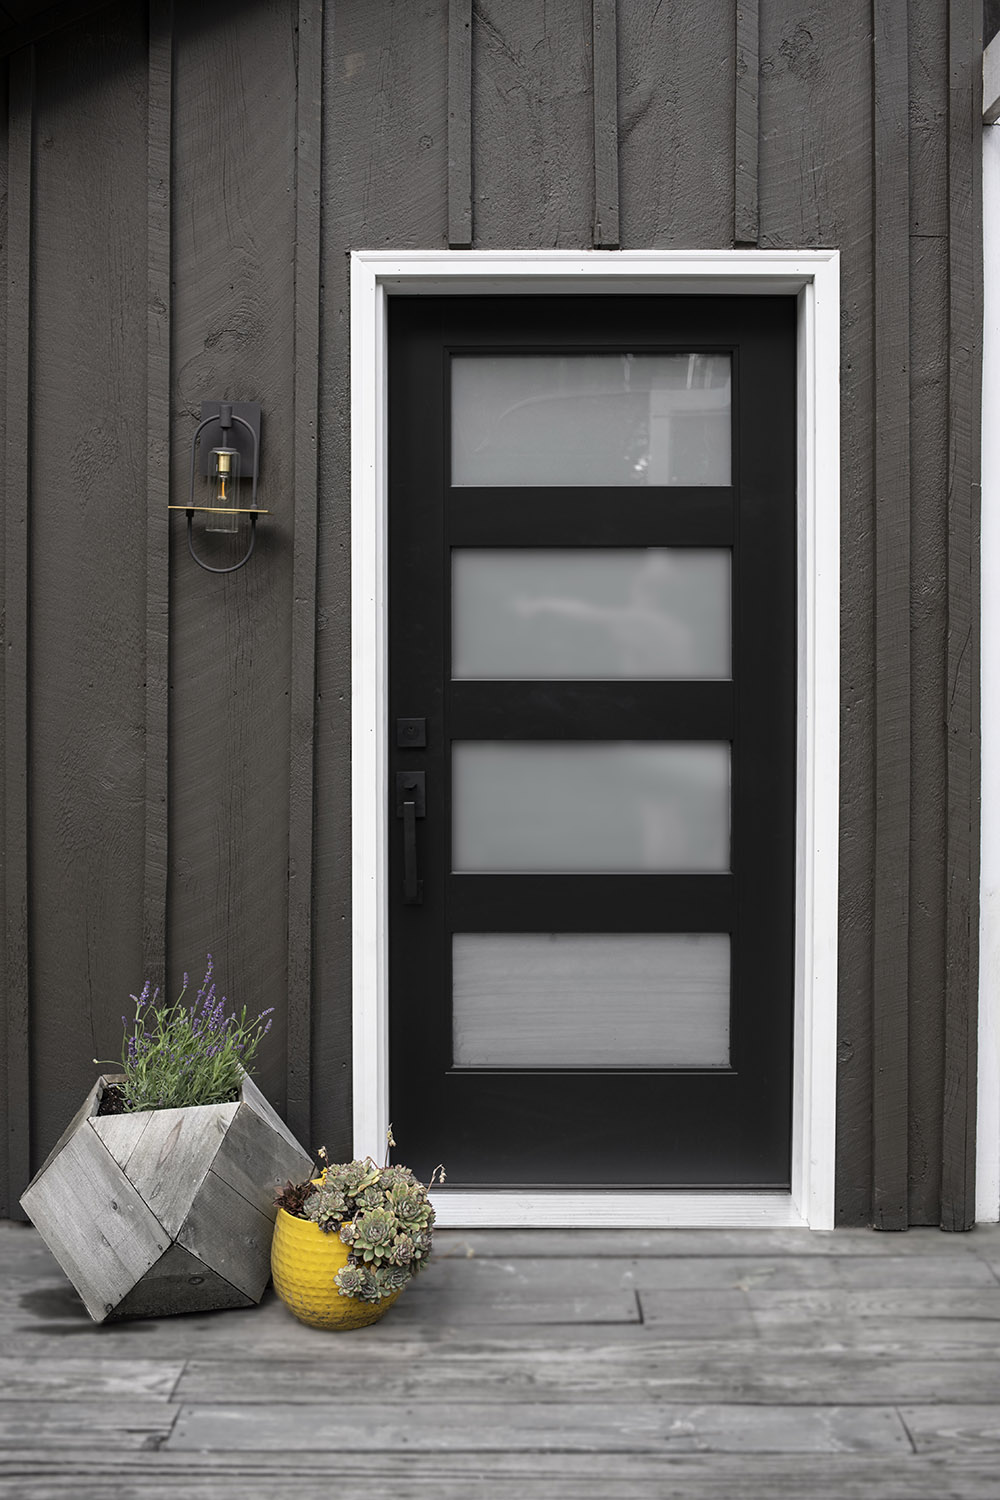 A pair of planters sit outside a black and glass modern front door.